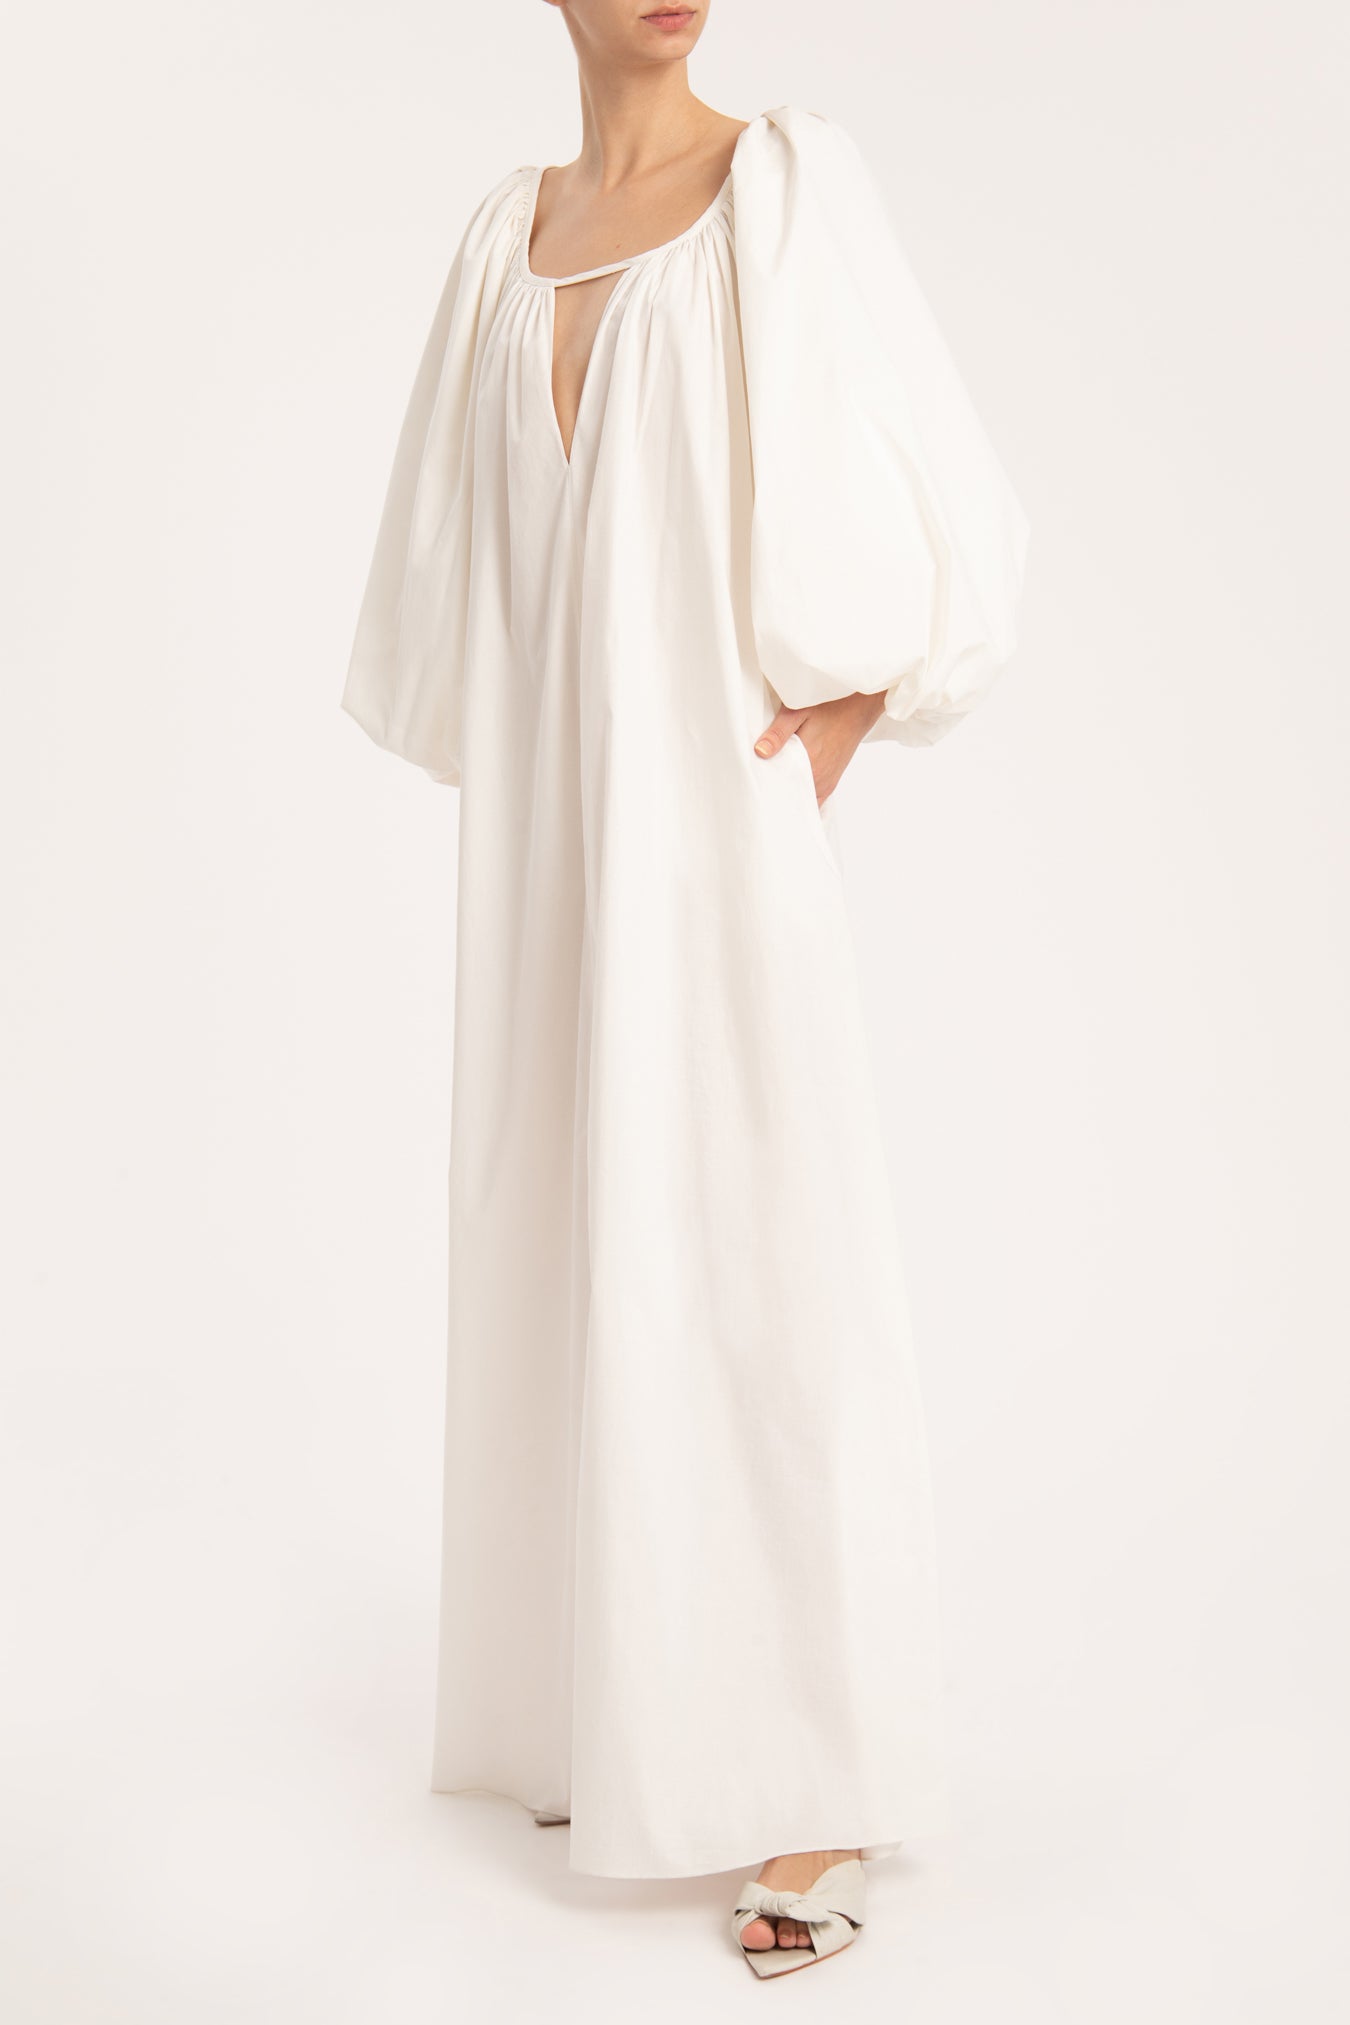 Effortless Chic Off White Puff-Sleeved Long Dress Front